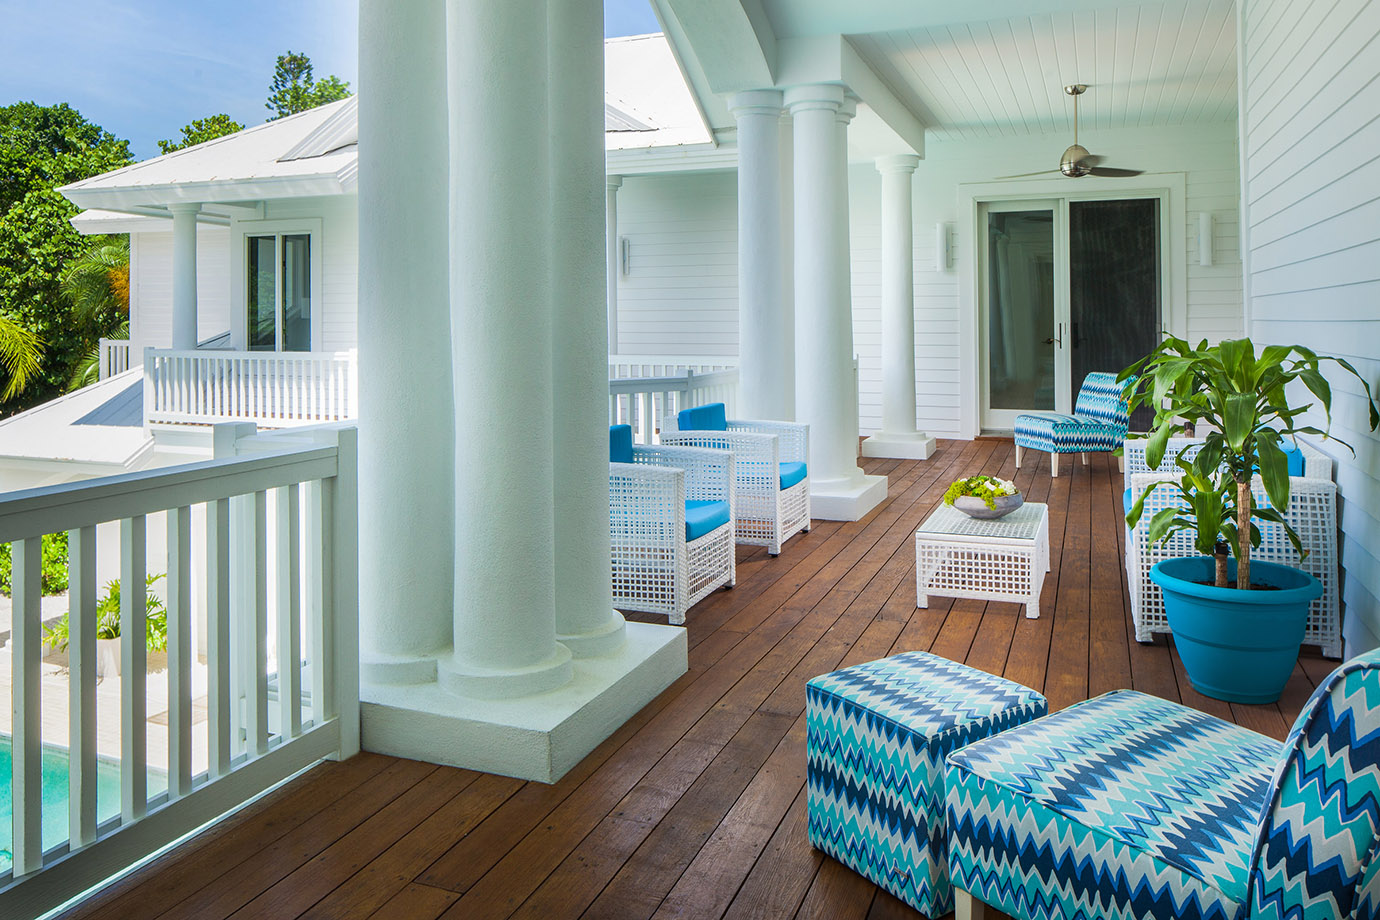 A porch with blue wicker furniture overlooking a pool near a potted plant at the Sea Oats Estate in Captiva Island, FL